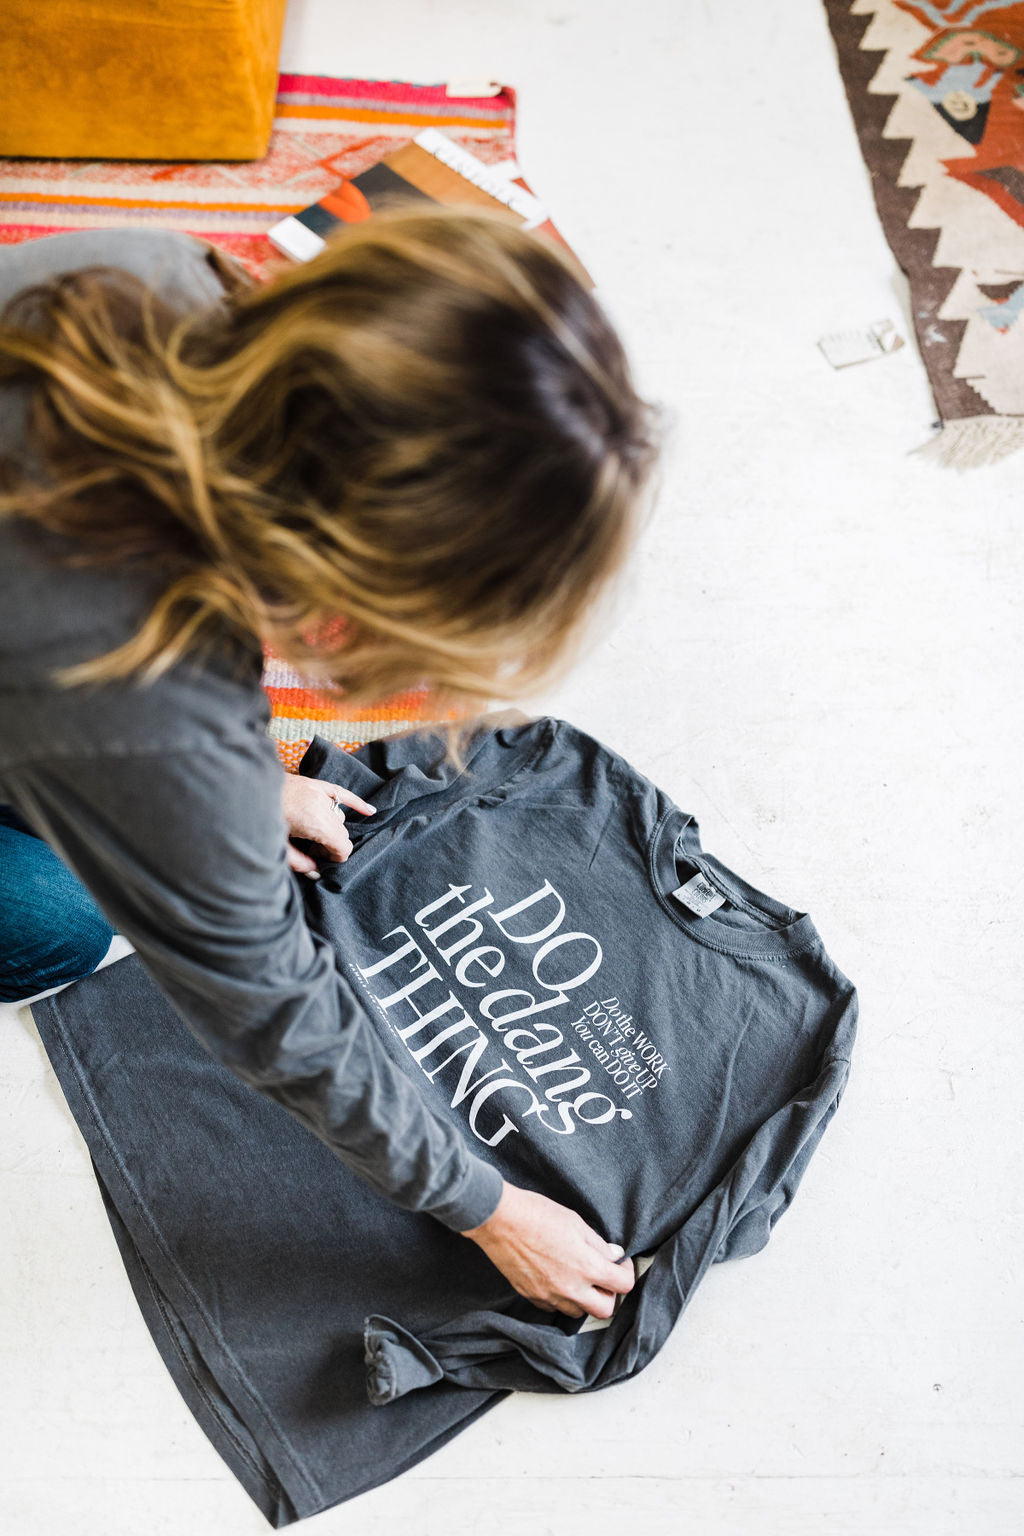 do the dang thing | pepper long sleeved comfort colors tee